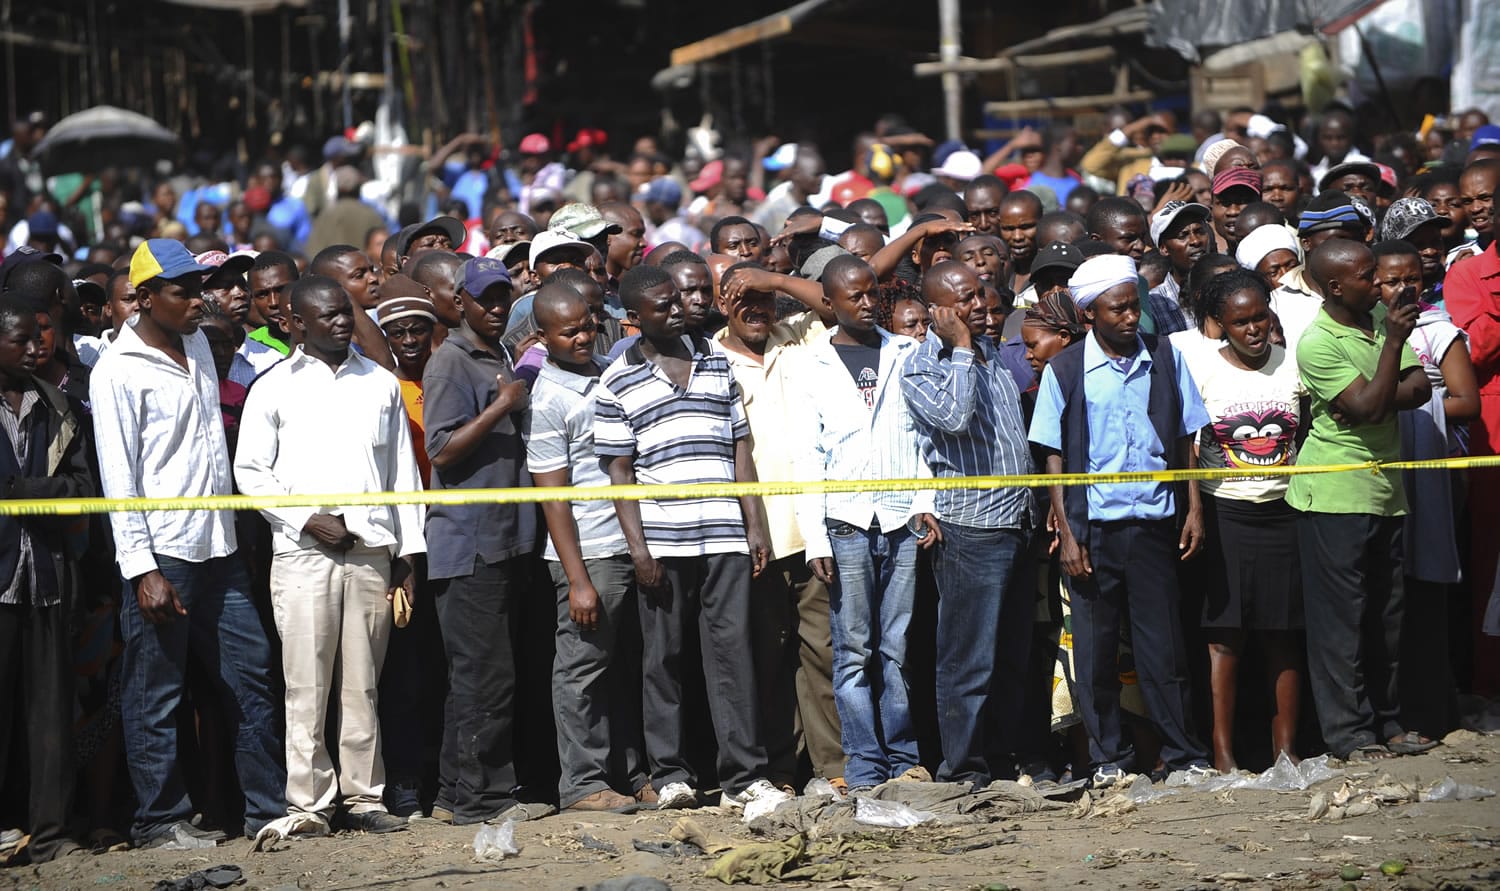 Onlookers gather behind police tape at the site where two blasts detonated, one in a mini-van used for public transportation, in a market area of Nairobi, Kenya, on Friday.